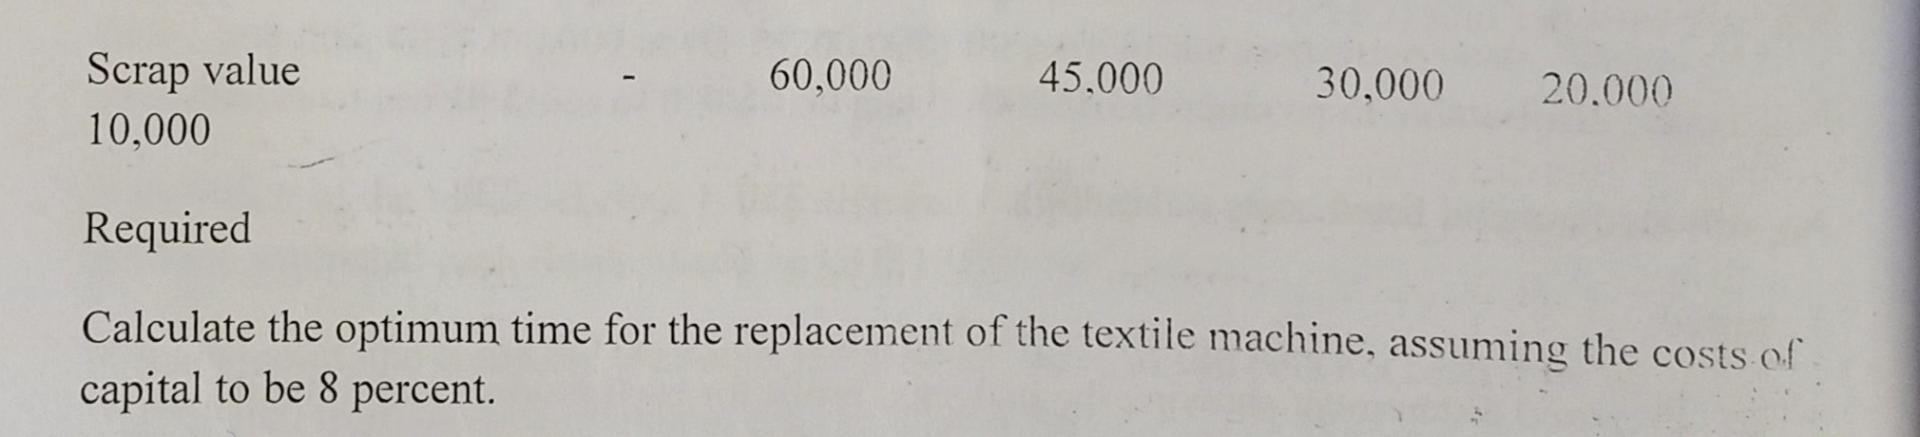 60,000 45.000 Scrap value 10,000 30,000 20.000 Required Calculate the optimum time for the replacement of the textile machine